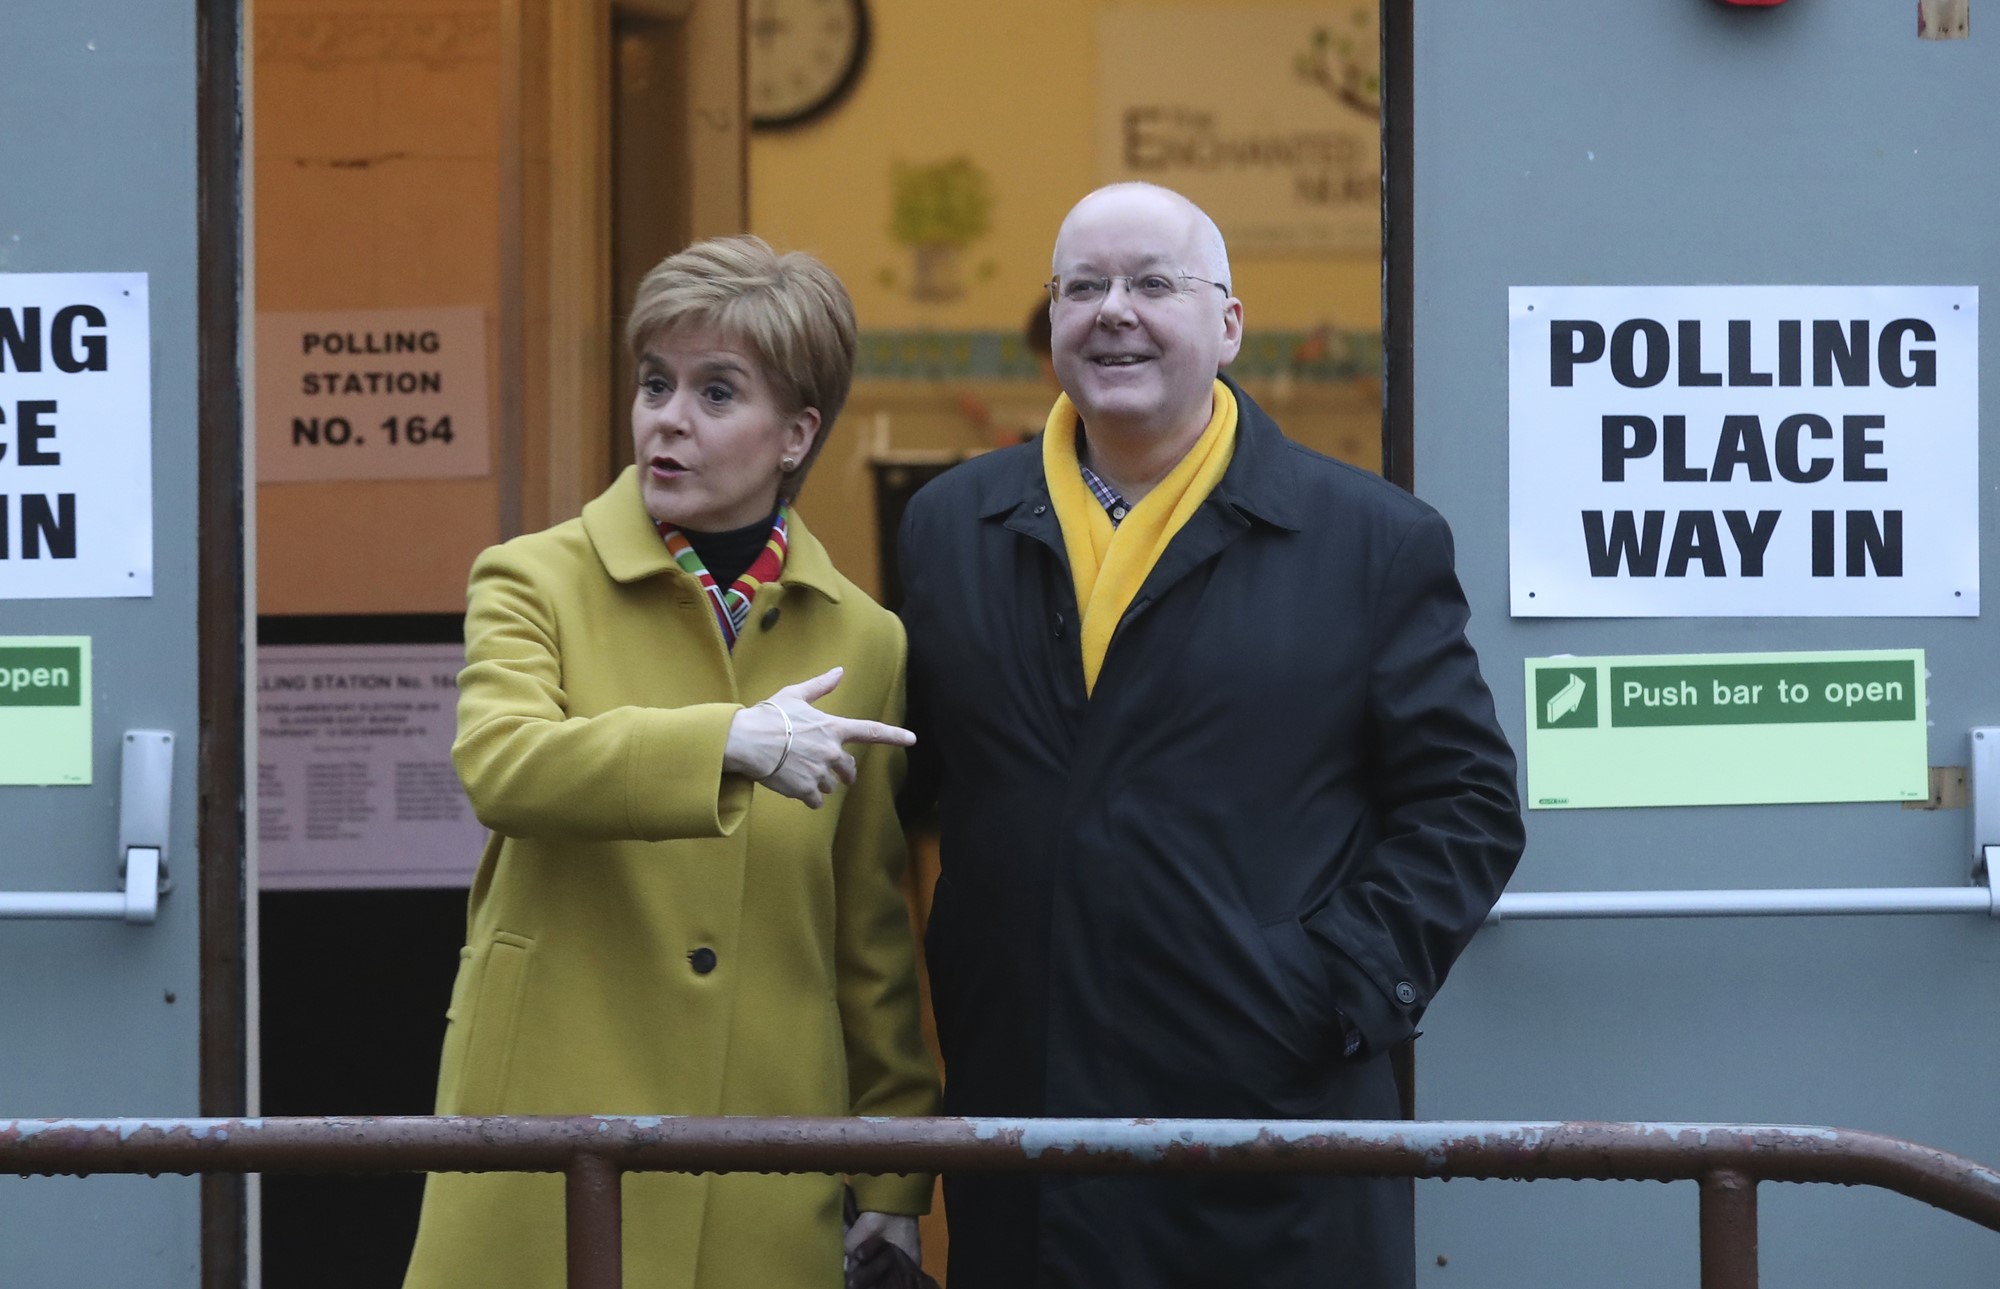 Nicola Sturgeon stands with her husband outside a Polling venue. 